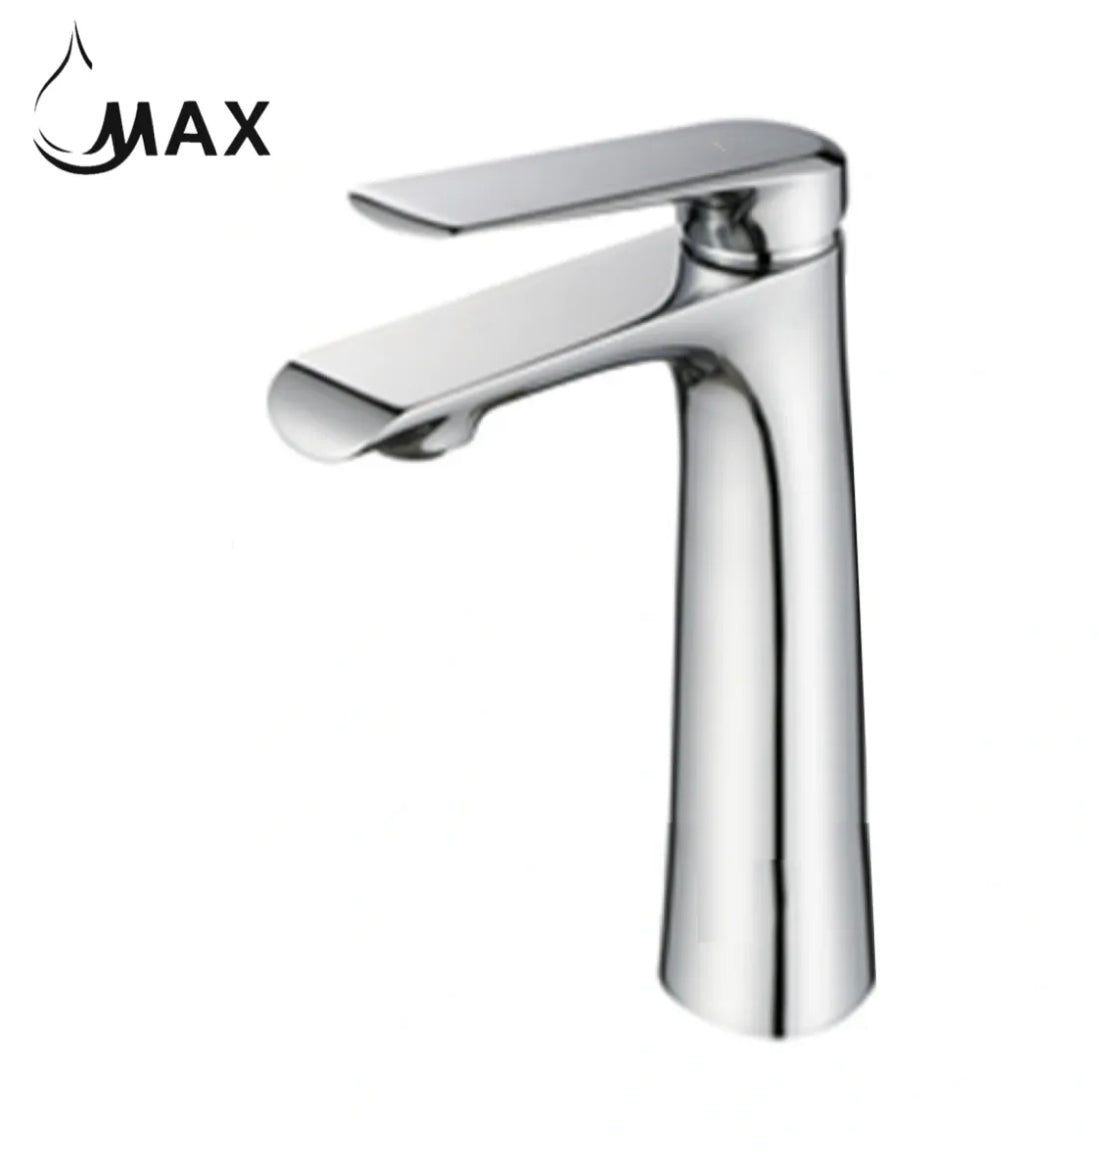 Vessel Sink Bathroom Faucet Ultra Thin Spout 10" Brushed Nickel Finish